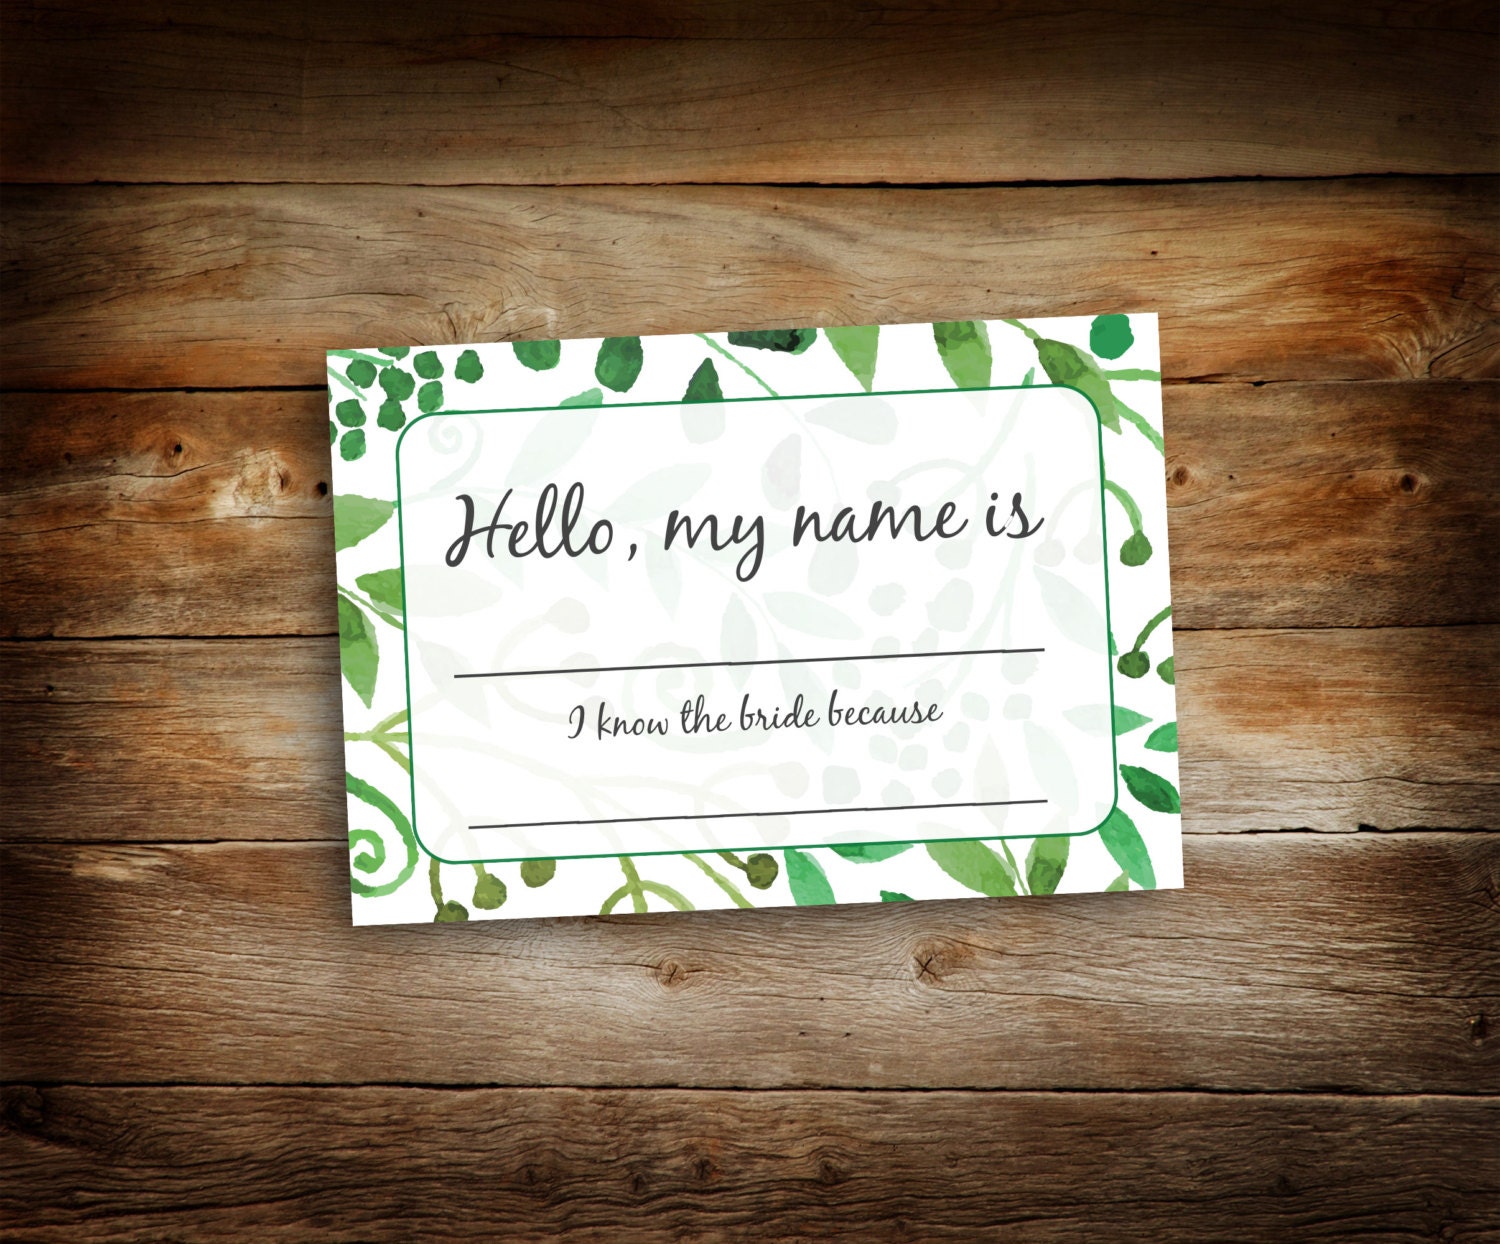 free-printable-wedding-name-tags-the-template-can-also-be-name-tag